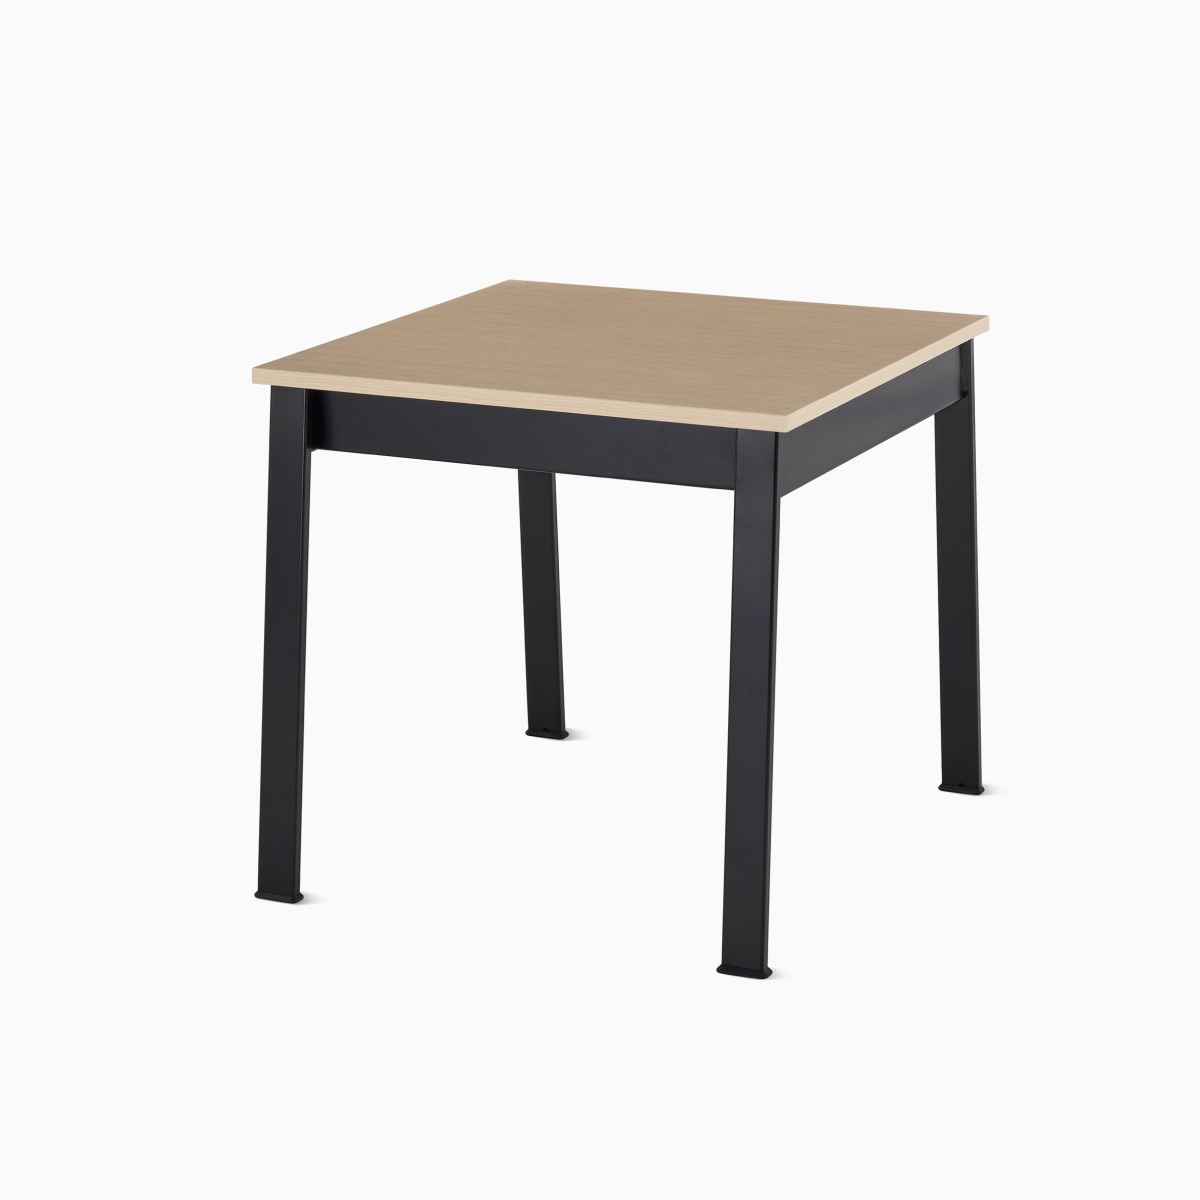 Angled view of an Easton Side Table with a clear on ash laminate top and black legs.